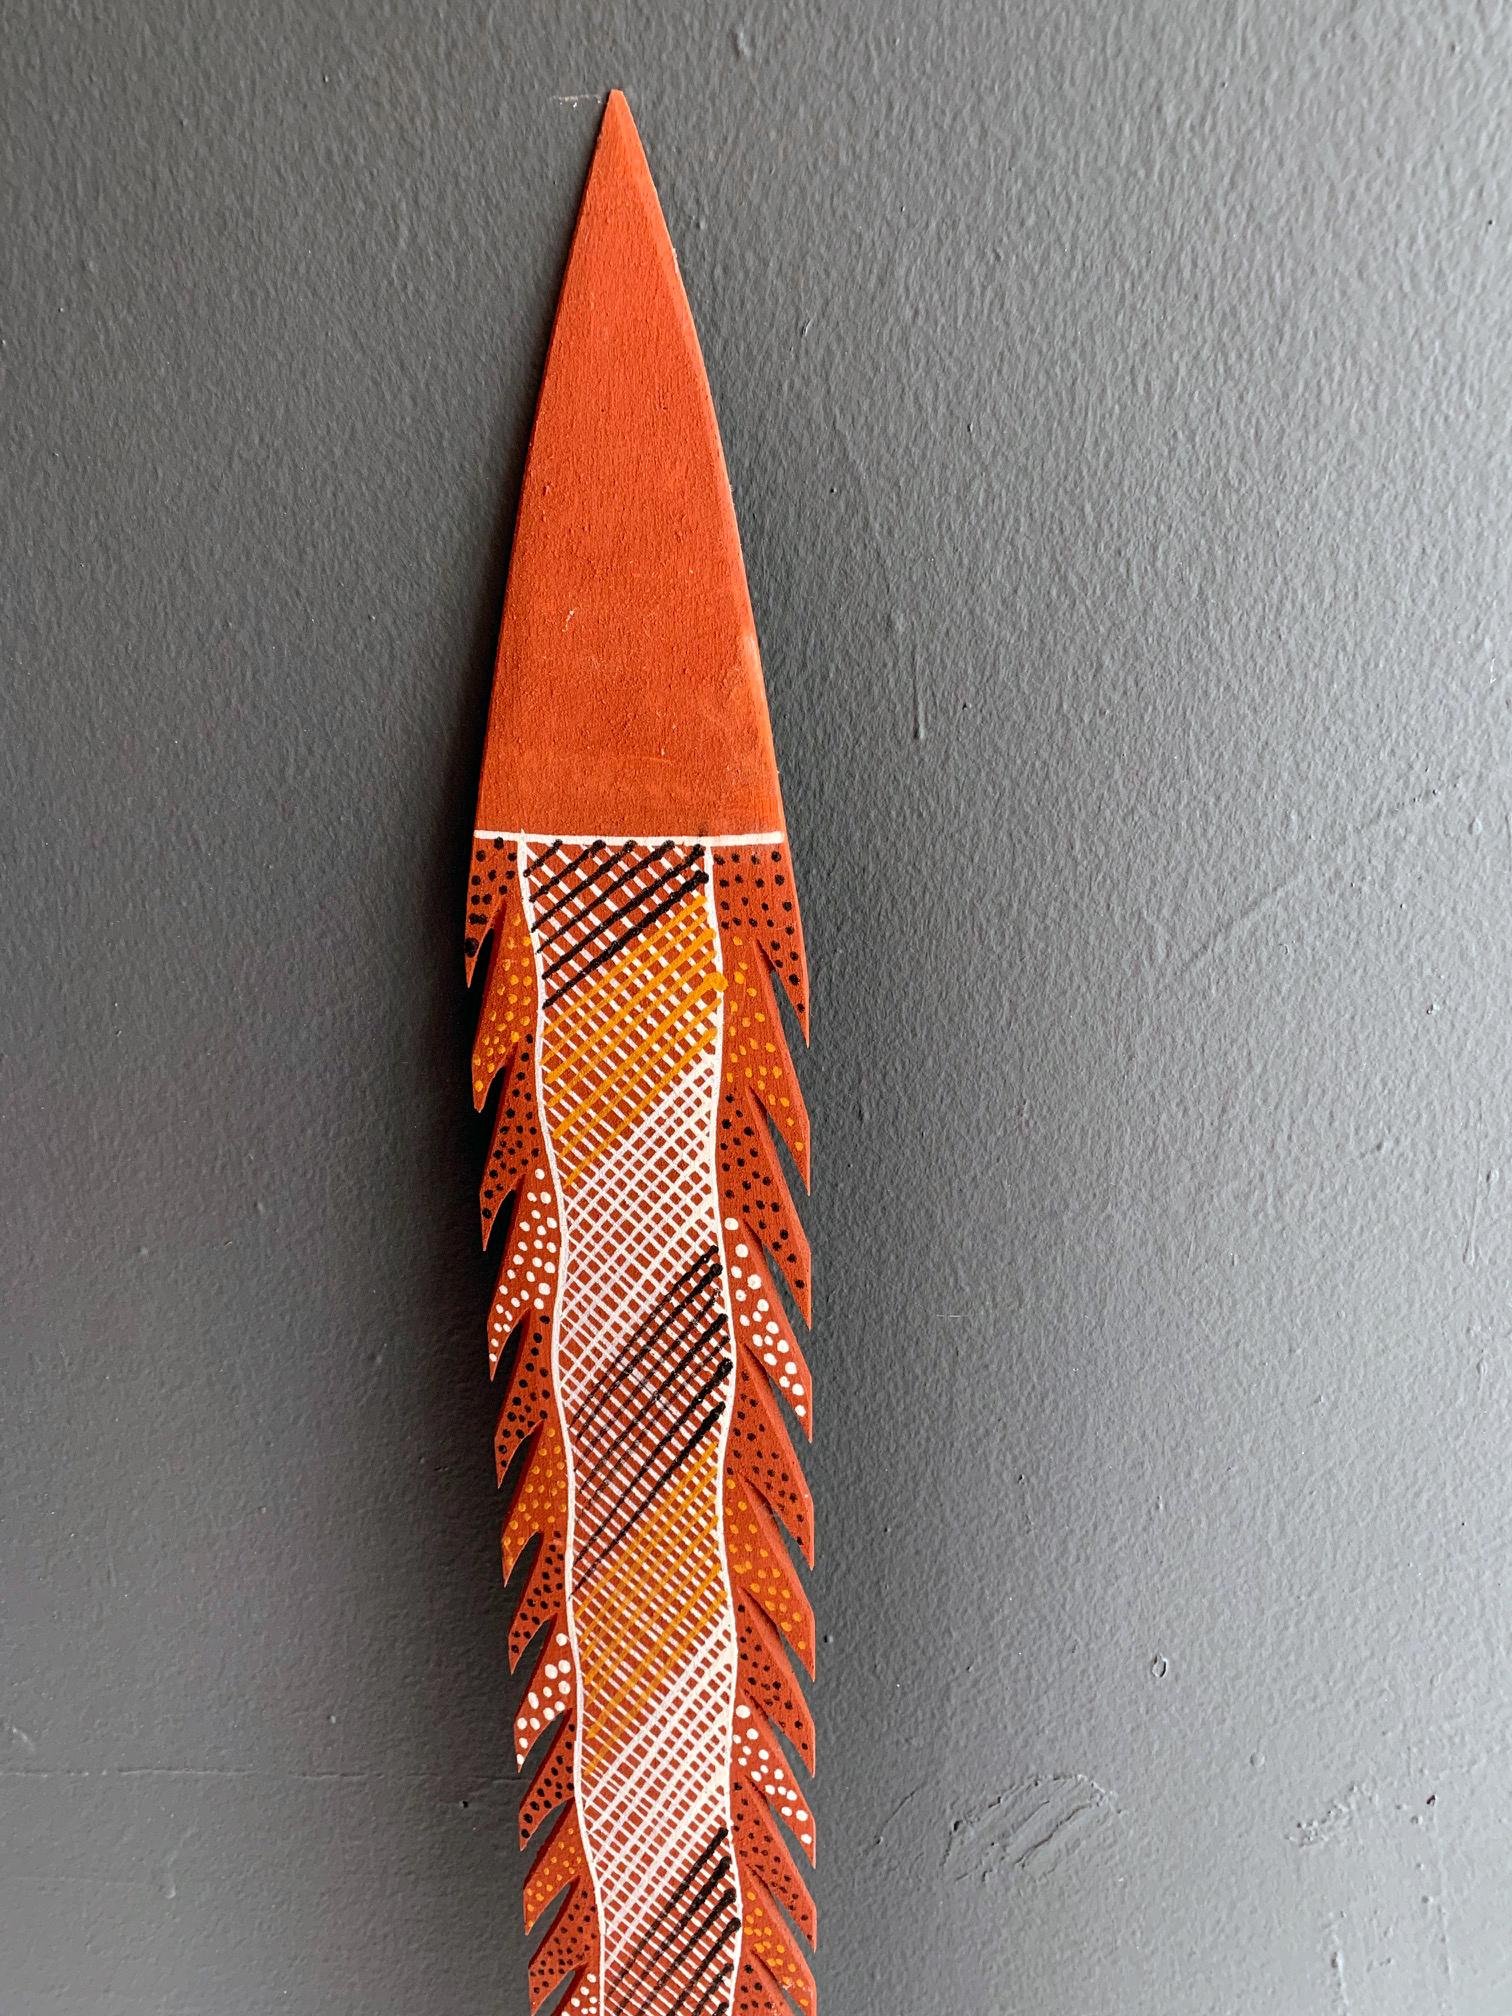 Title: A ceremonial spear with clan design paint
Artist: Patrick Freddy Puruntatameri
DOB: 19/04/1973
Medium: Ocher paint on ironwood carving
DOC: 2006
Provenance: COA from Jilamara Arts and Crafts, Melville Island.